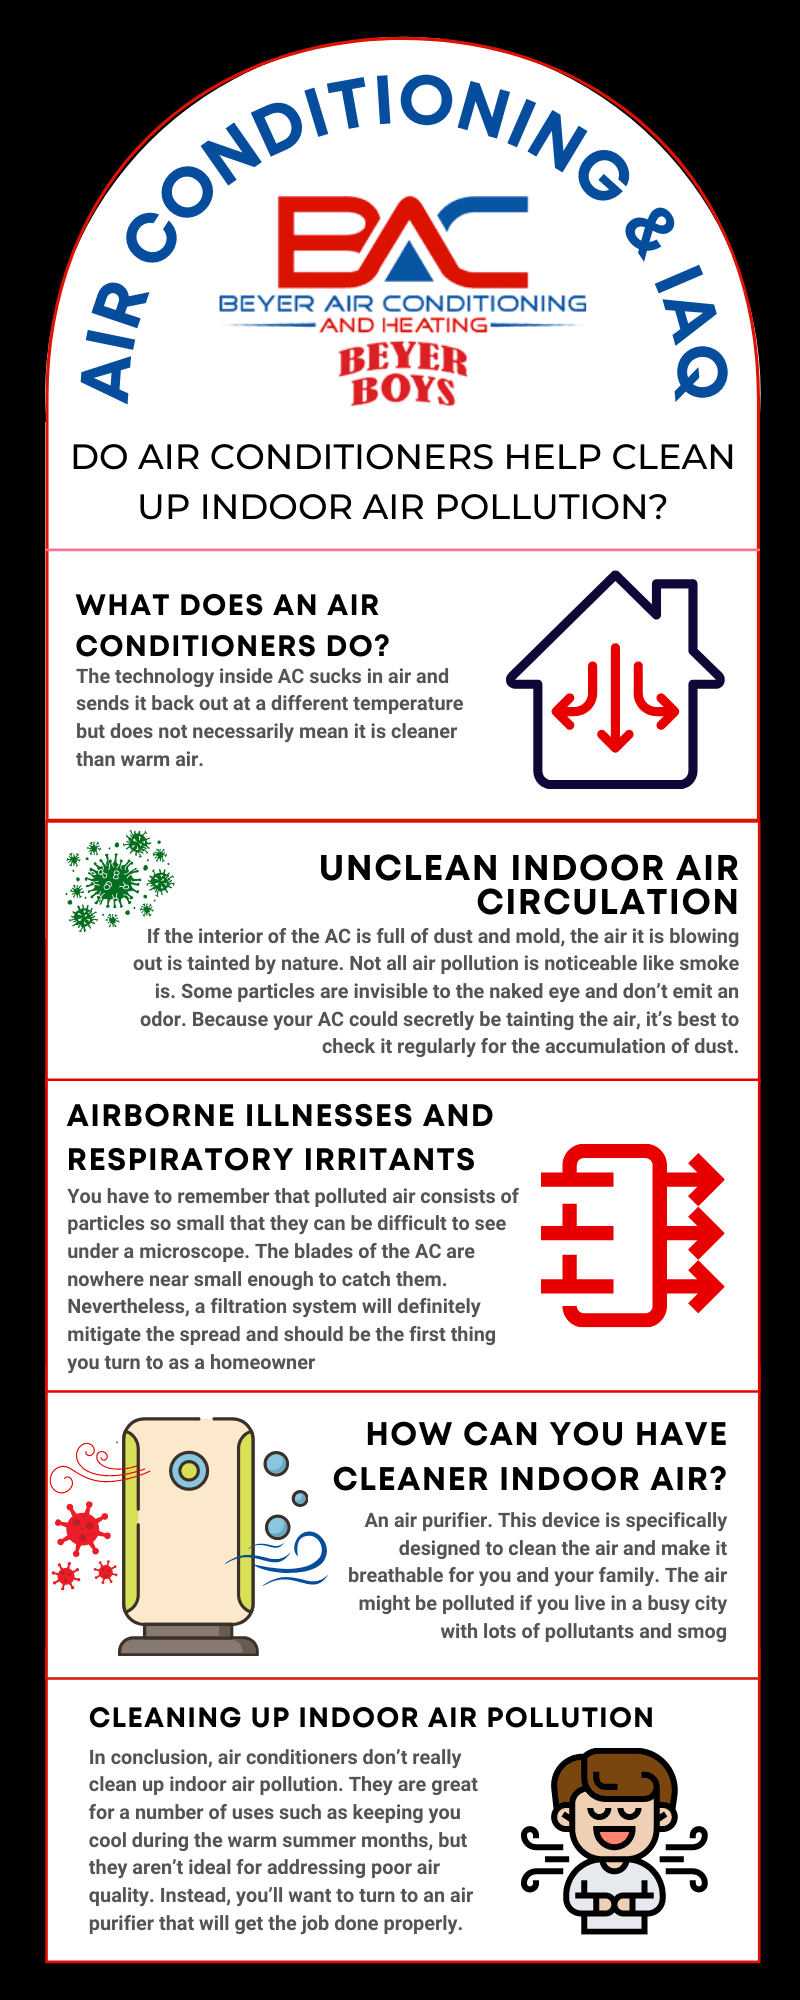 Do Air Conditioners Help Clean Indoor Air Pollution?